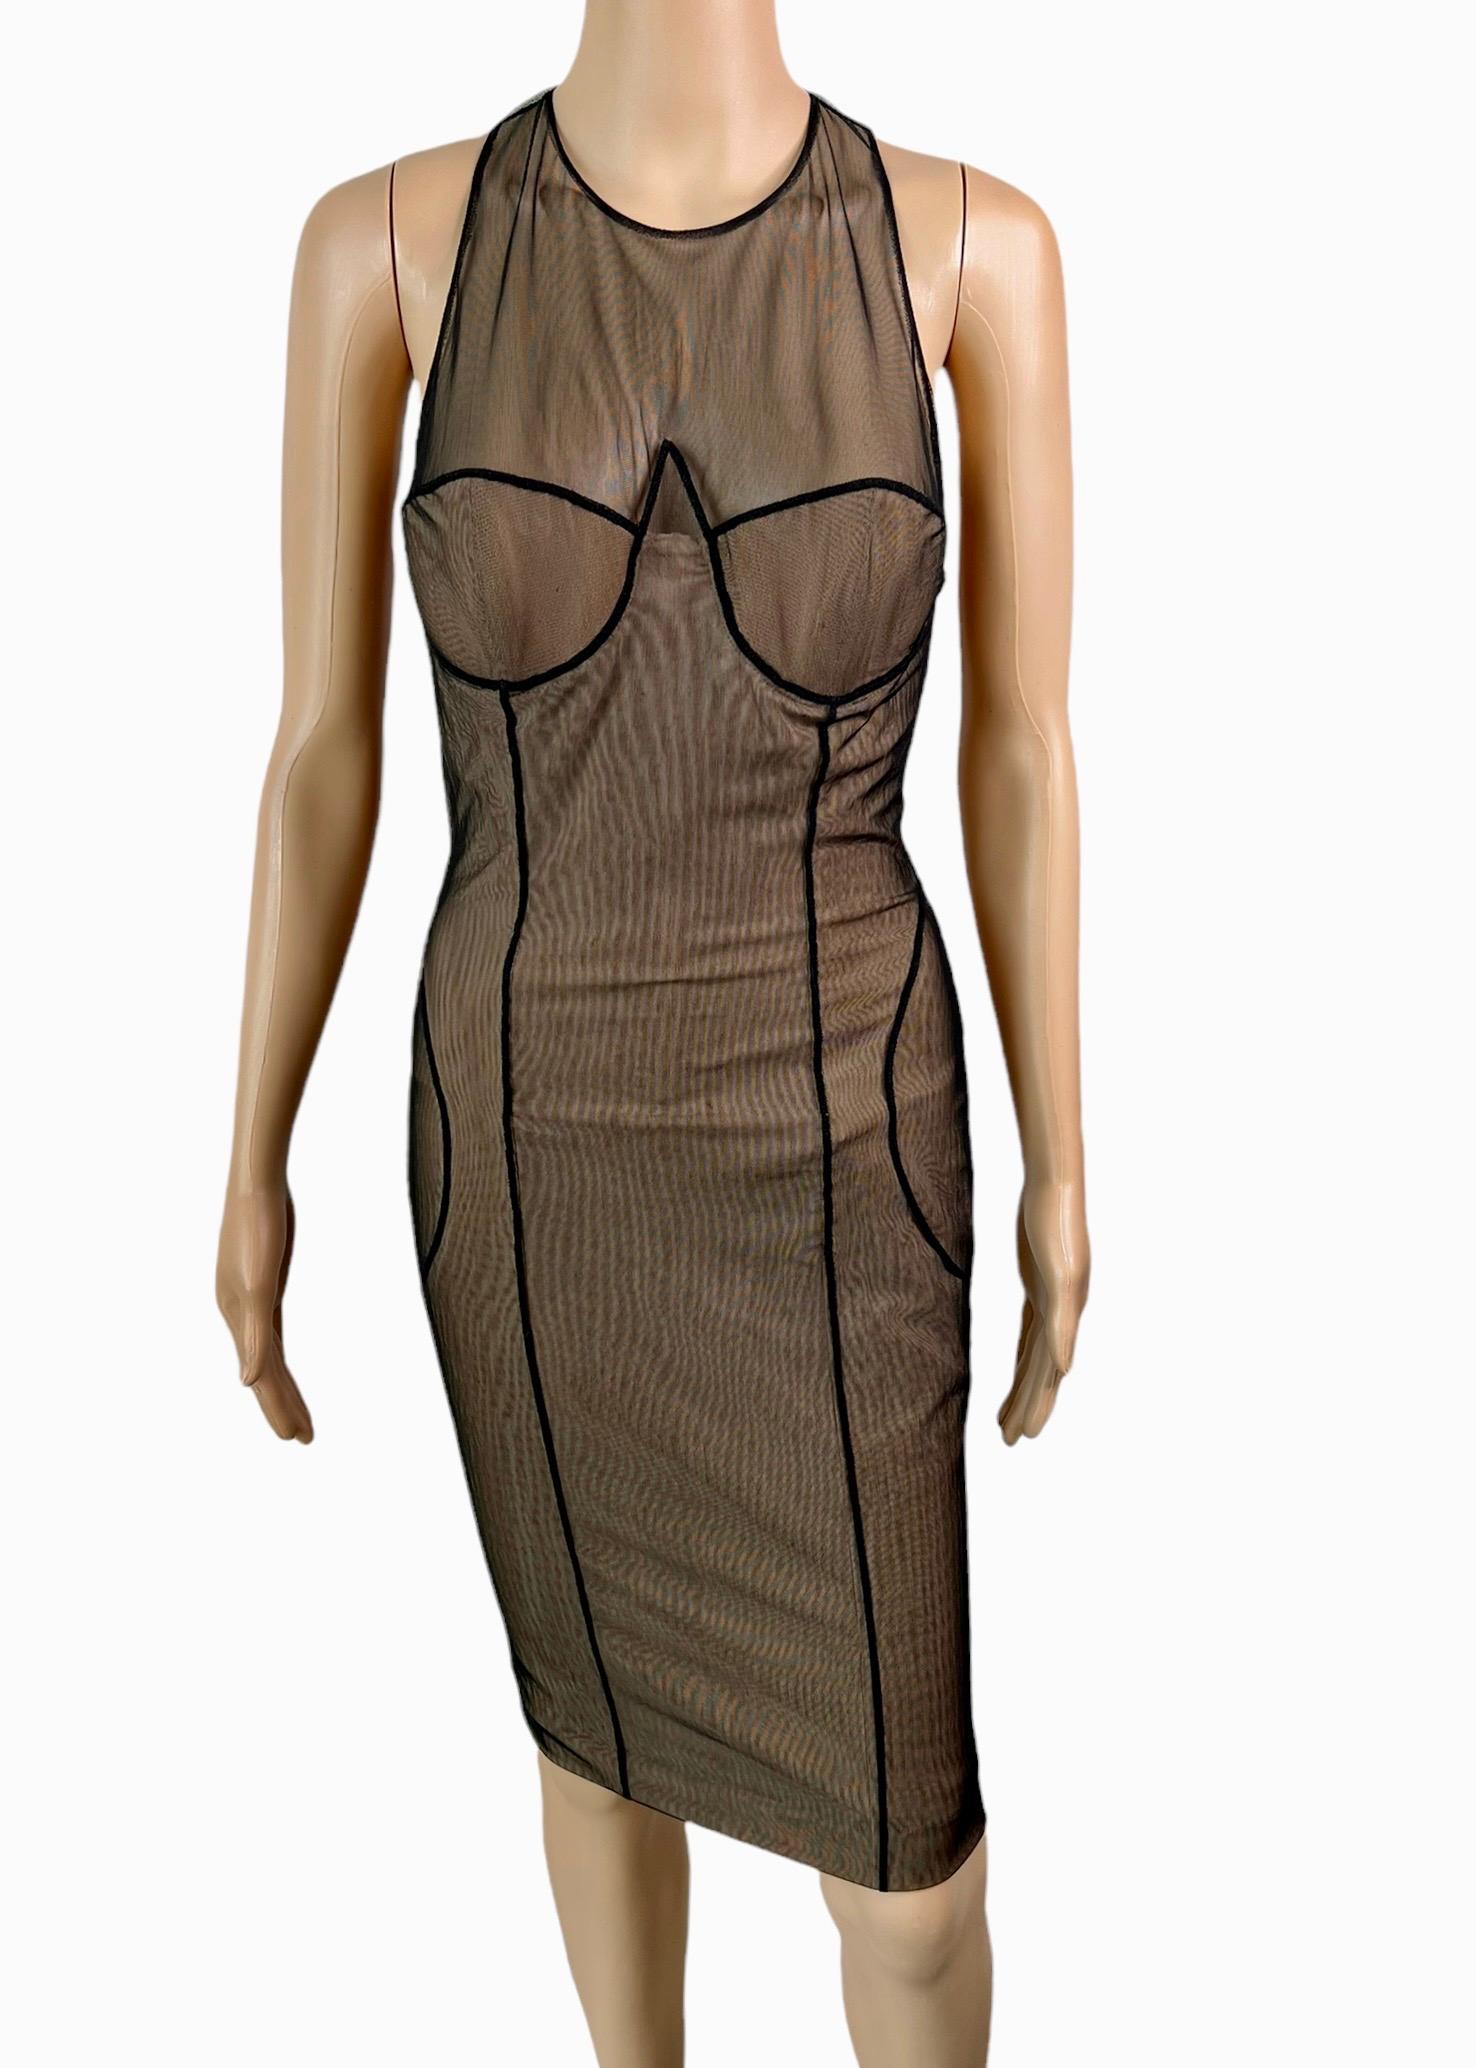 Gucci by Tom Ford S/S 2001 Runway Sheer Tulle Mesh Covered Bustier Corset Midi Dress IT 40

Look 2 from Gucci S/S 2001 Runway Collection designed by Tom Ford. Gucci midi dress with mesh overlay, scoop neck, structured bodice and concealed zip